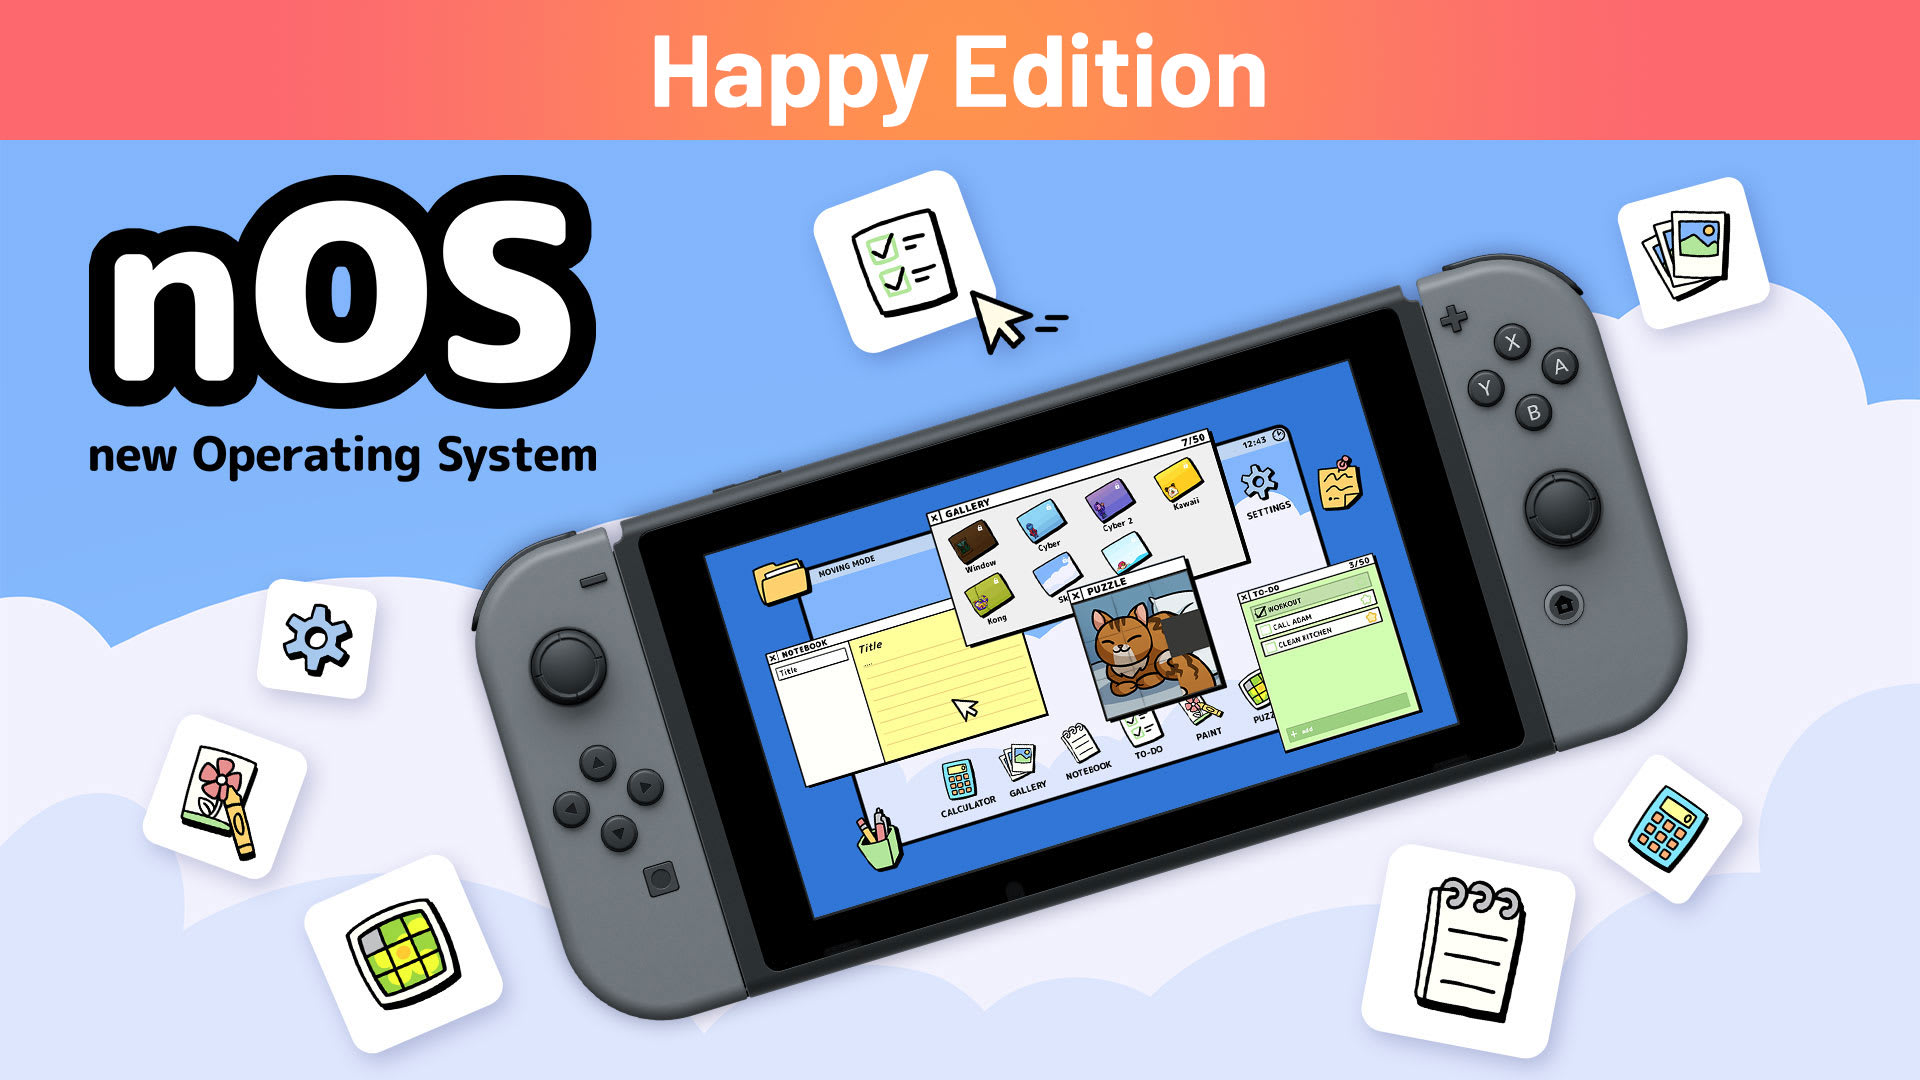 nOS new Operating System Happy Edition 1